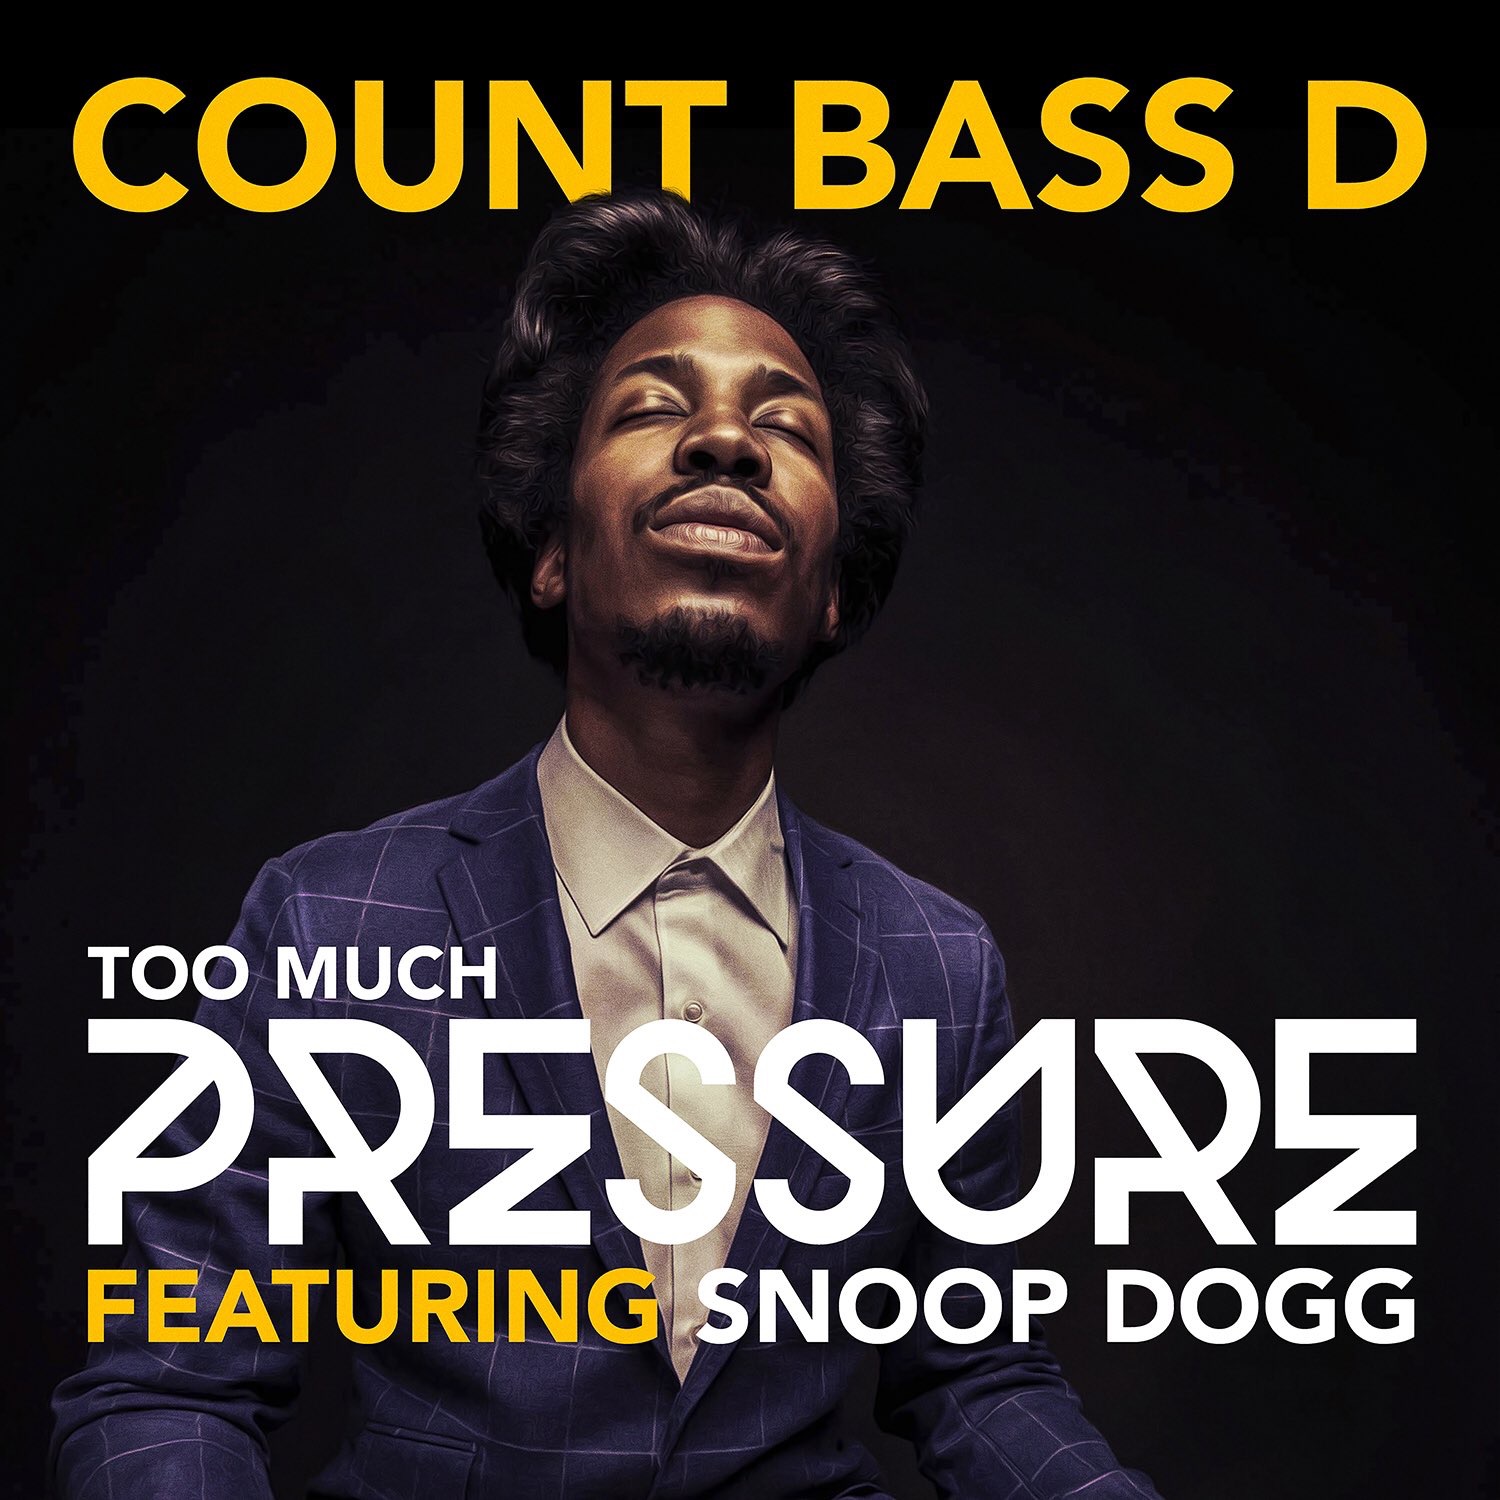 Count Bass D x DJ Pocket x Snoop Dogg Collab On ‘Too Much Pressure’ EP